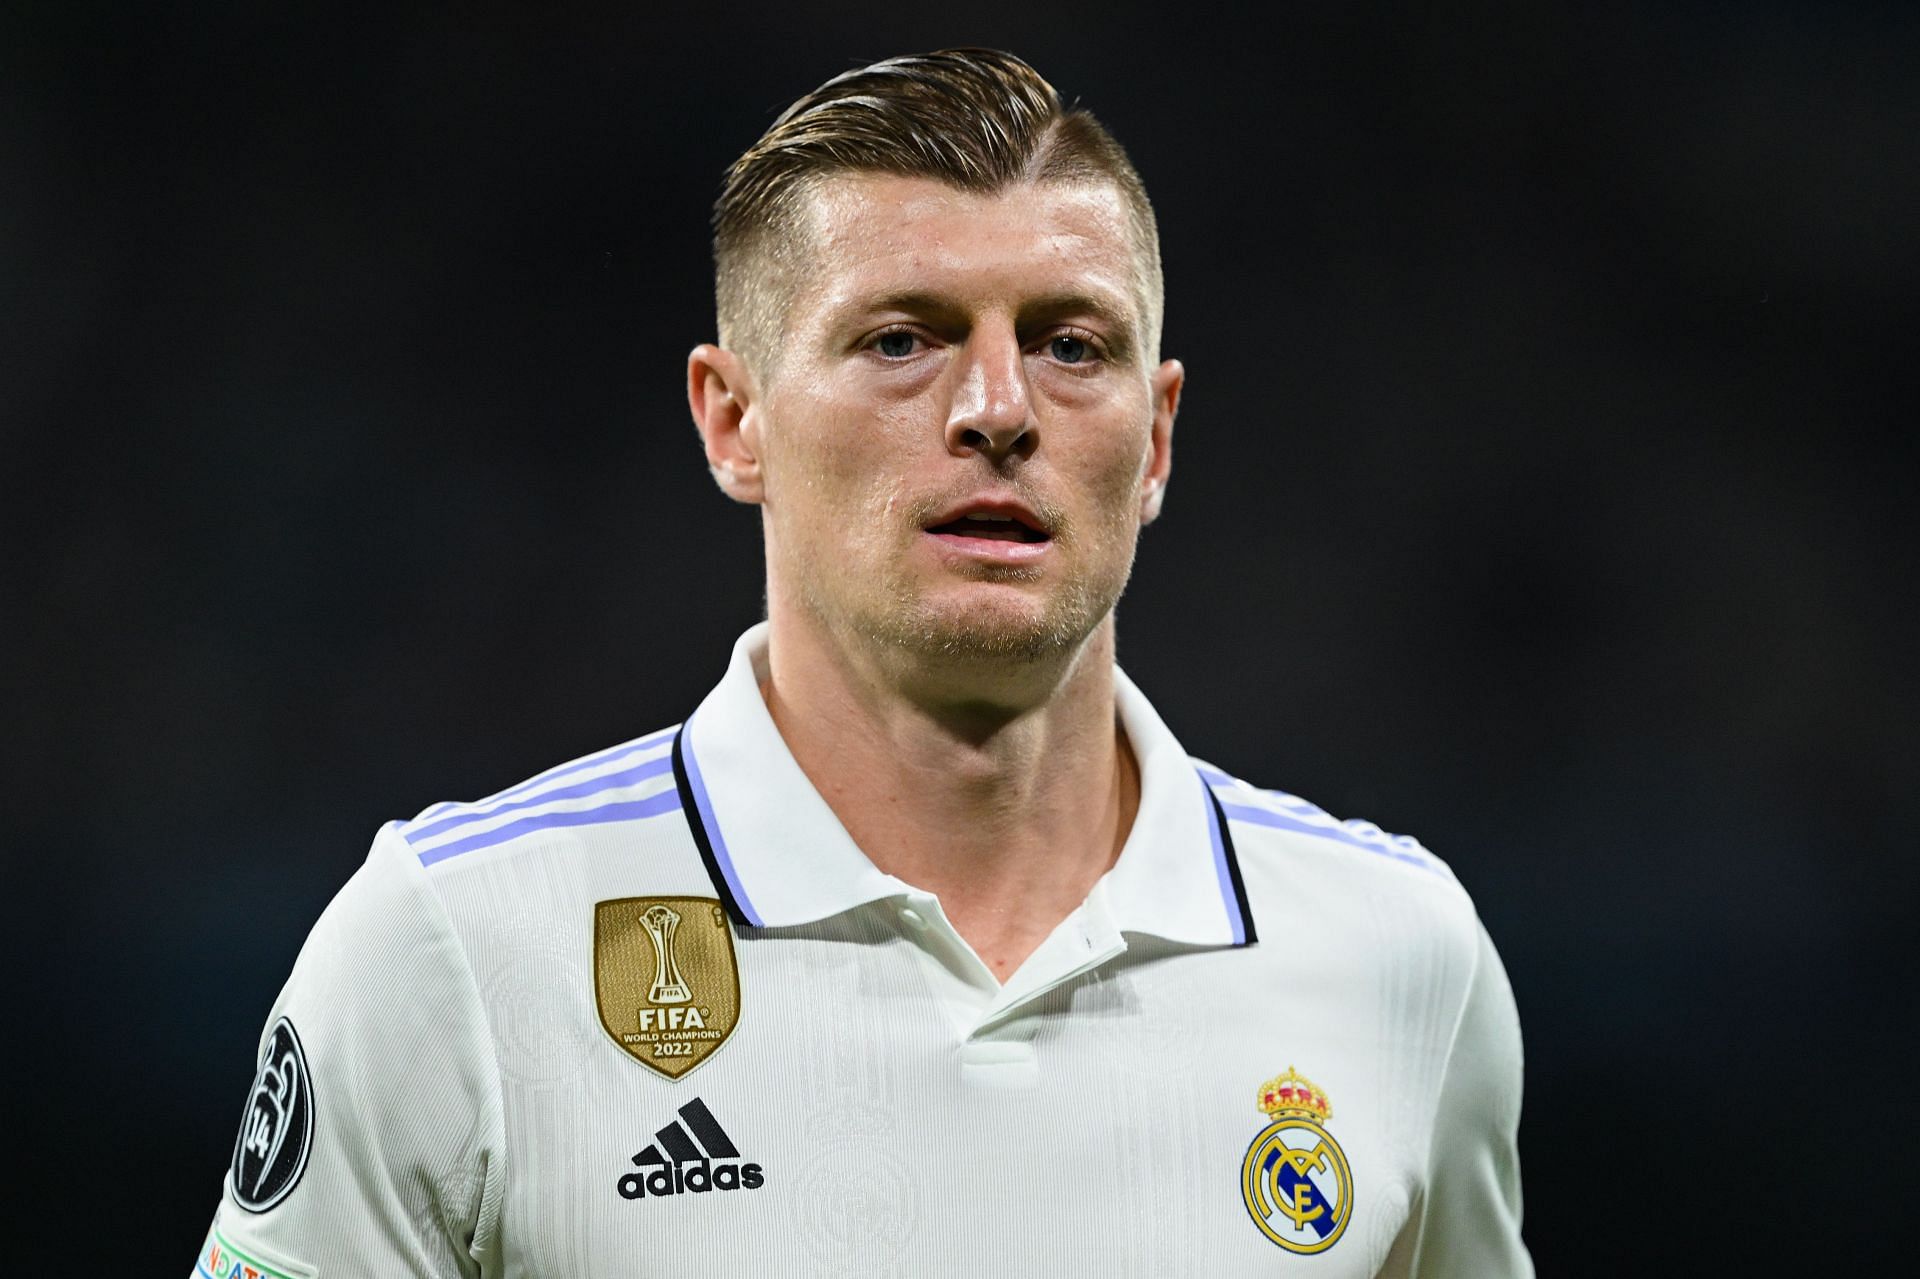 Toni Kroos is raring to go ahead of the new season.